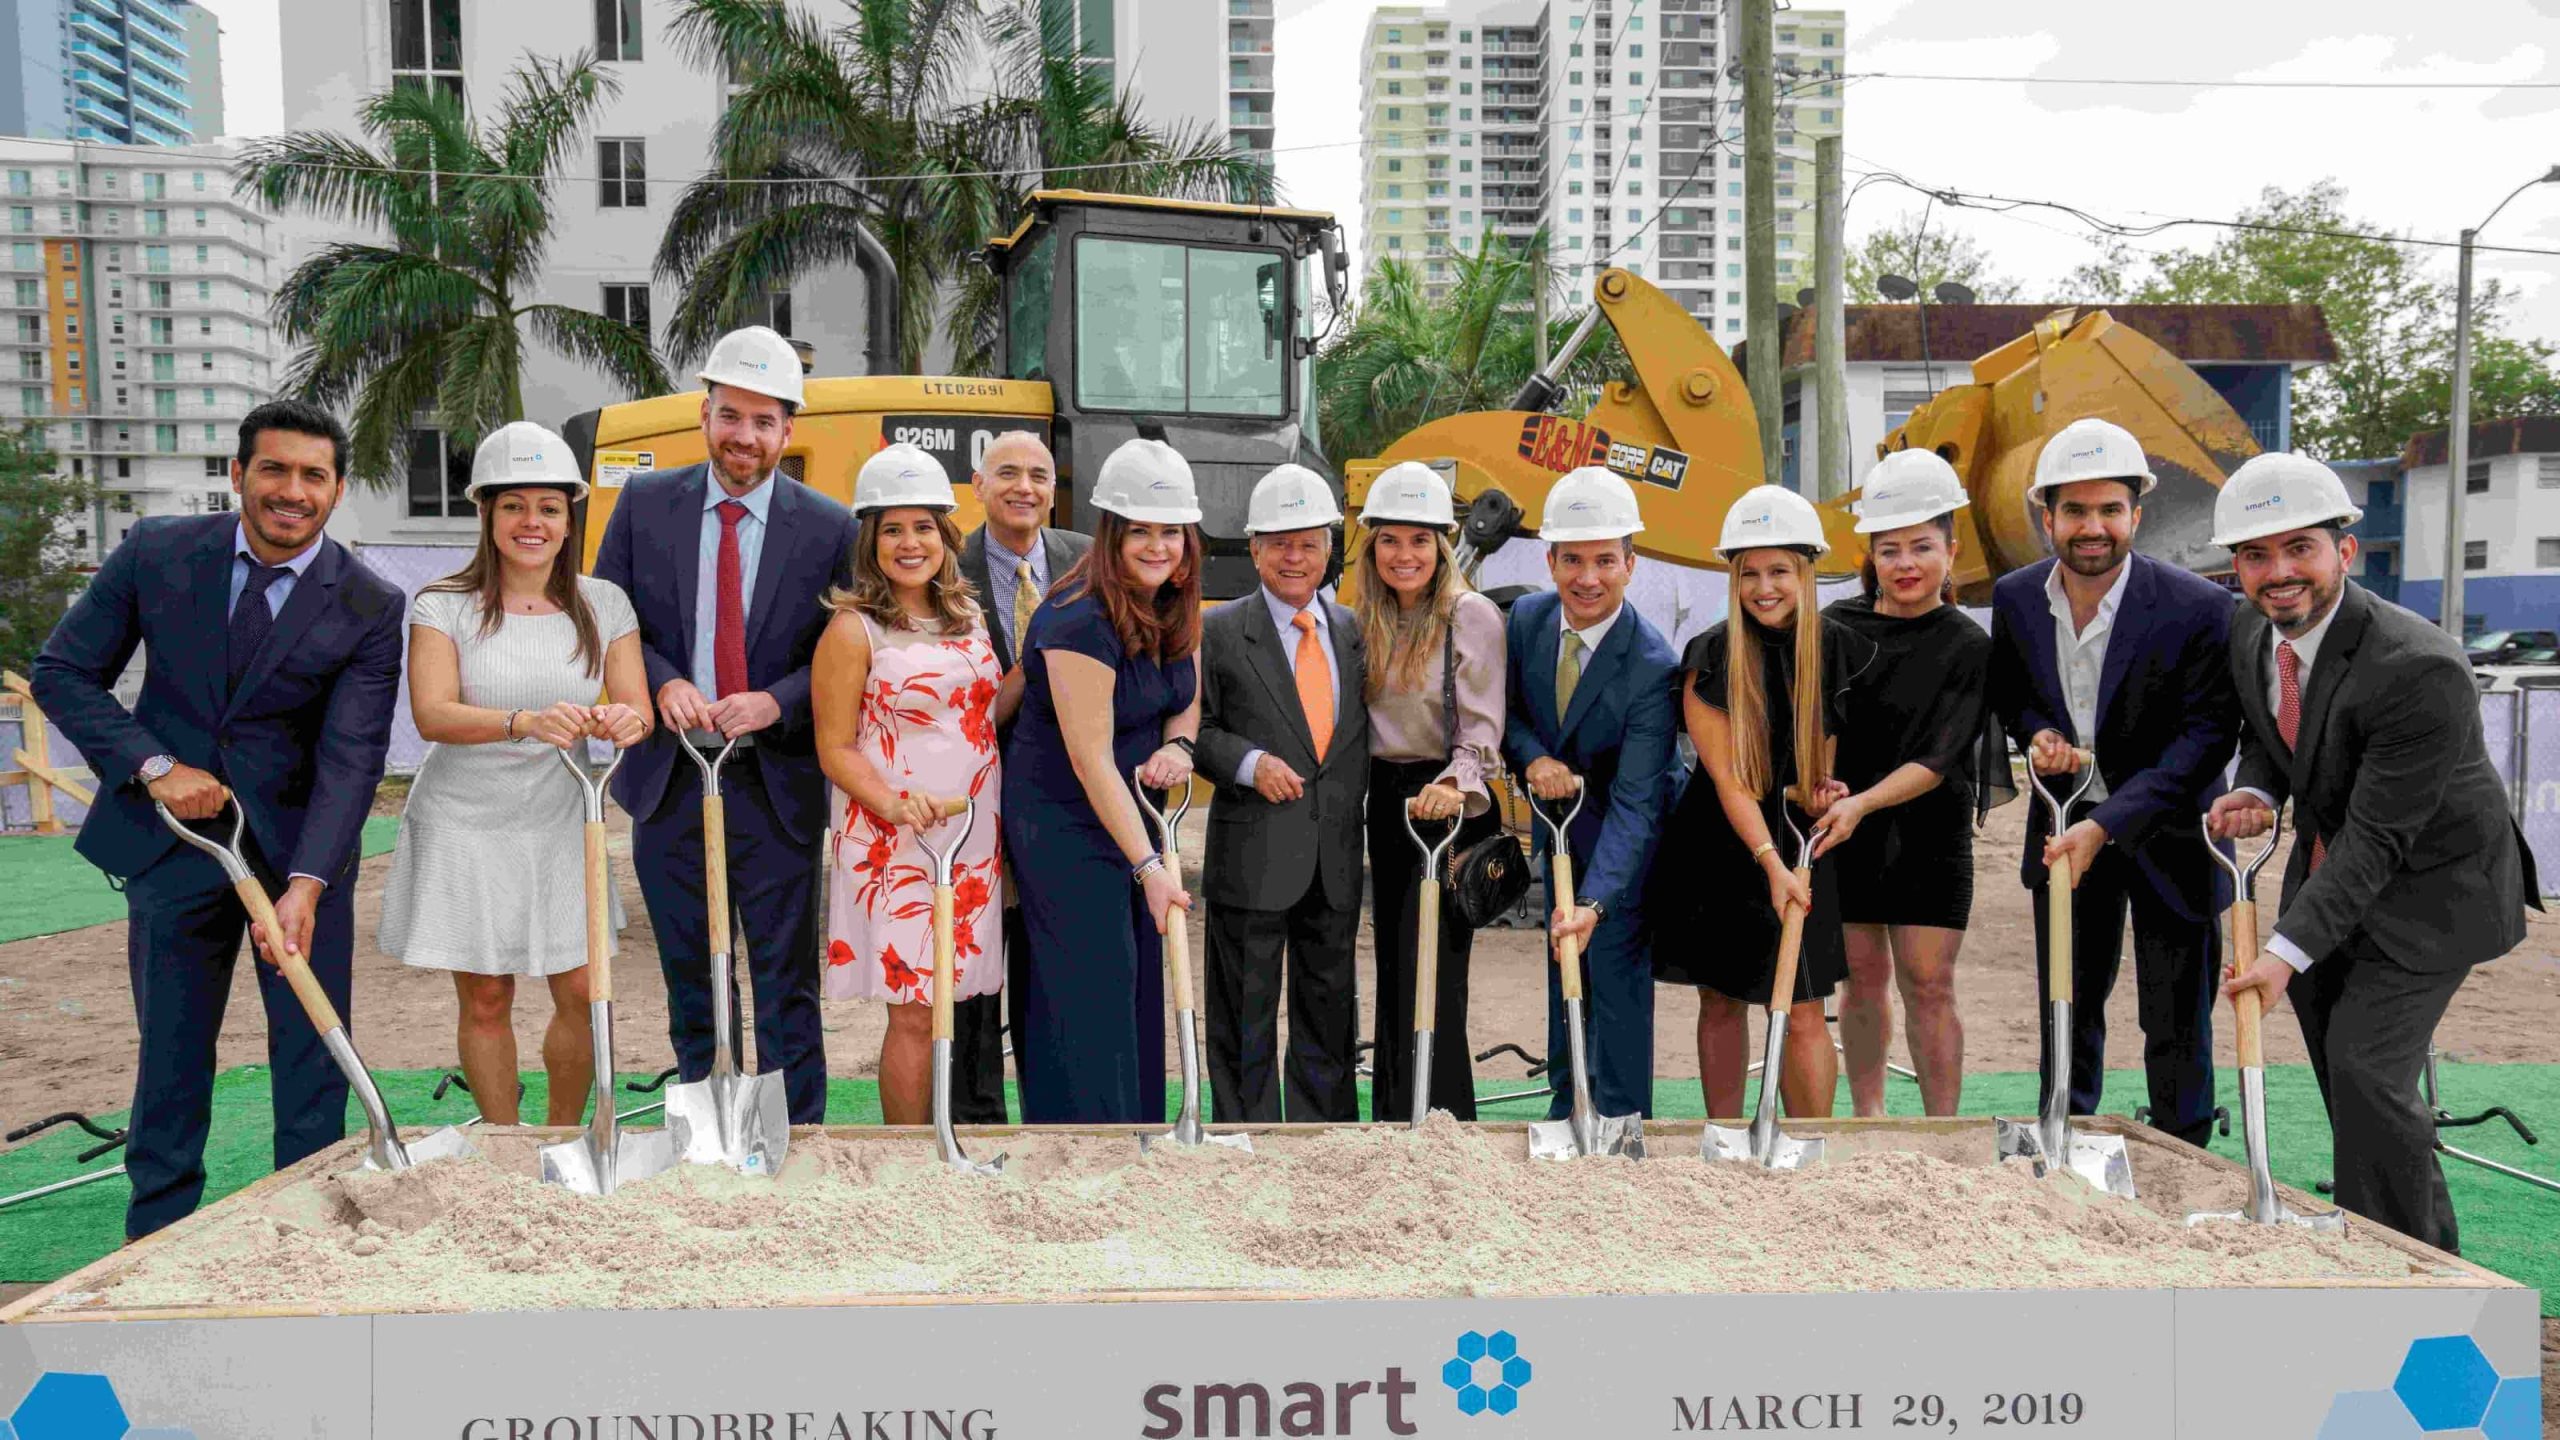 CONSTRUCTION NOW UNDERWAY AT SMART BRICKELL, WITH THREE TOWERS